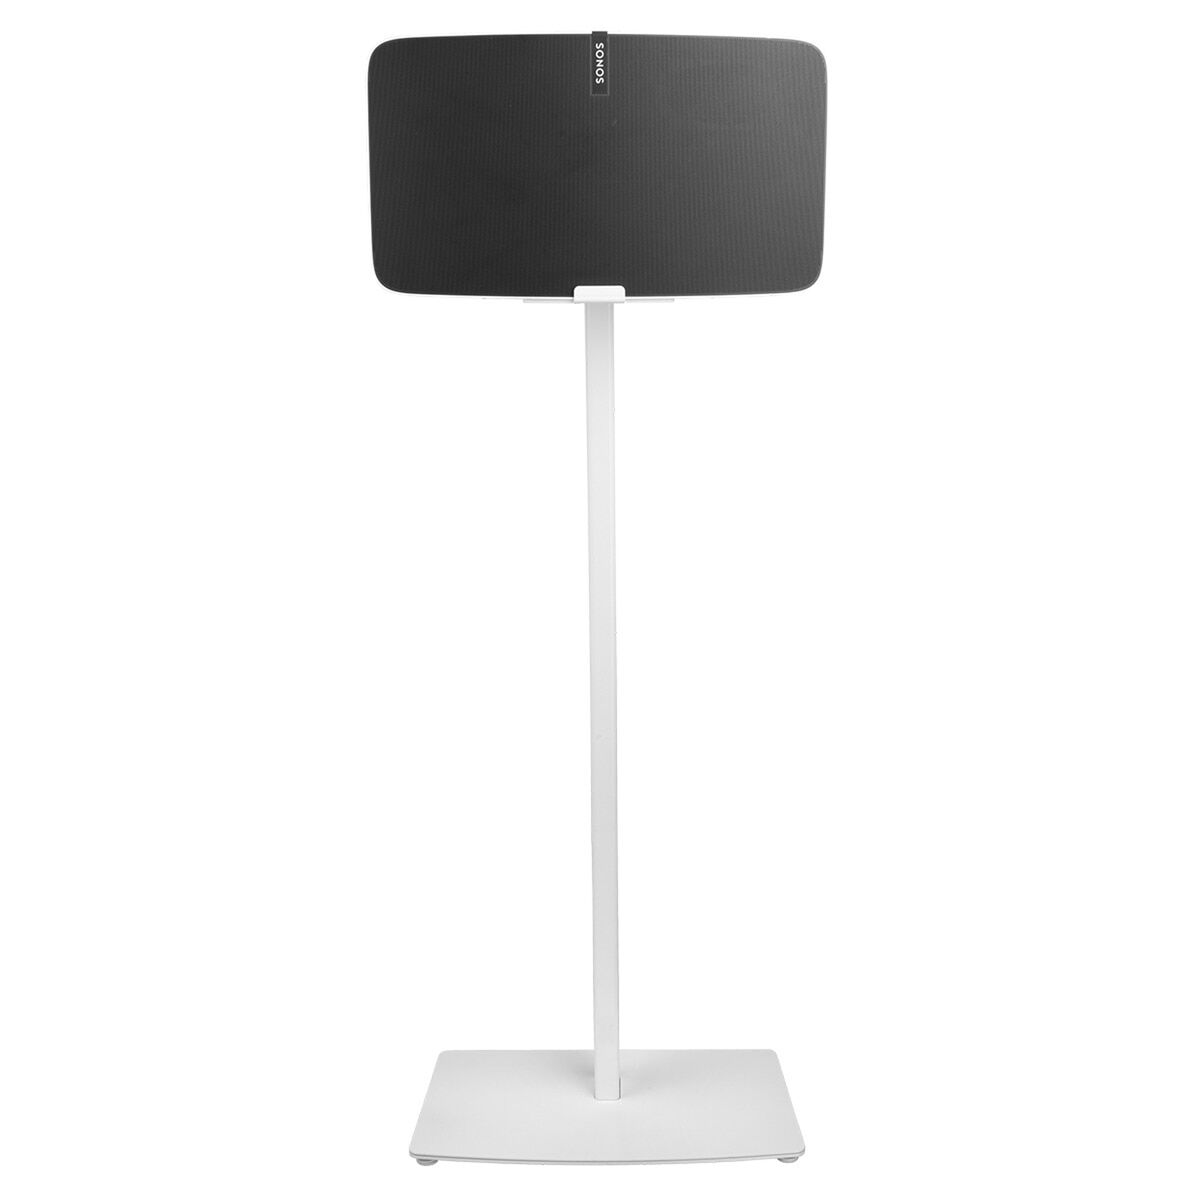 Speaker Stand Sonos Floor Stand White, Sonos, Electronics, Audio and Hi-Fi equipment, speaker-stand-sonos-floor-stand-white, Brand_Sonos, category-reference-2609, category-reference-2637, category-reference-2882, category-reference-t-19653, category-reference-t-19899, category-reference-t-21329, category-reference-t-25554, category-reference-t-7441, cinema and television, Condition_NEW, music, Price_100 - 200, RiotNook